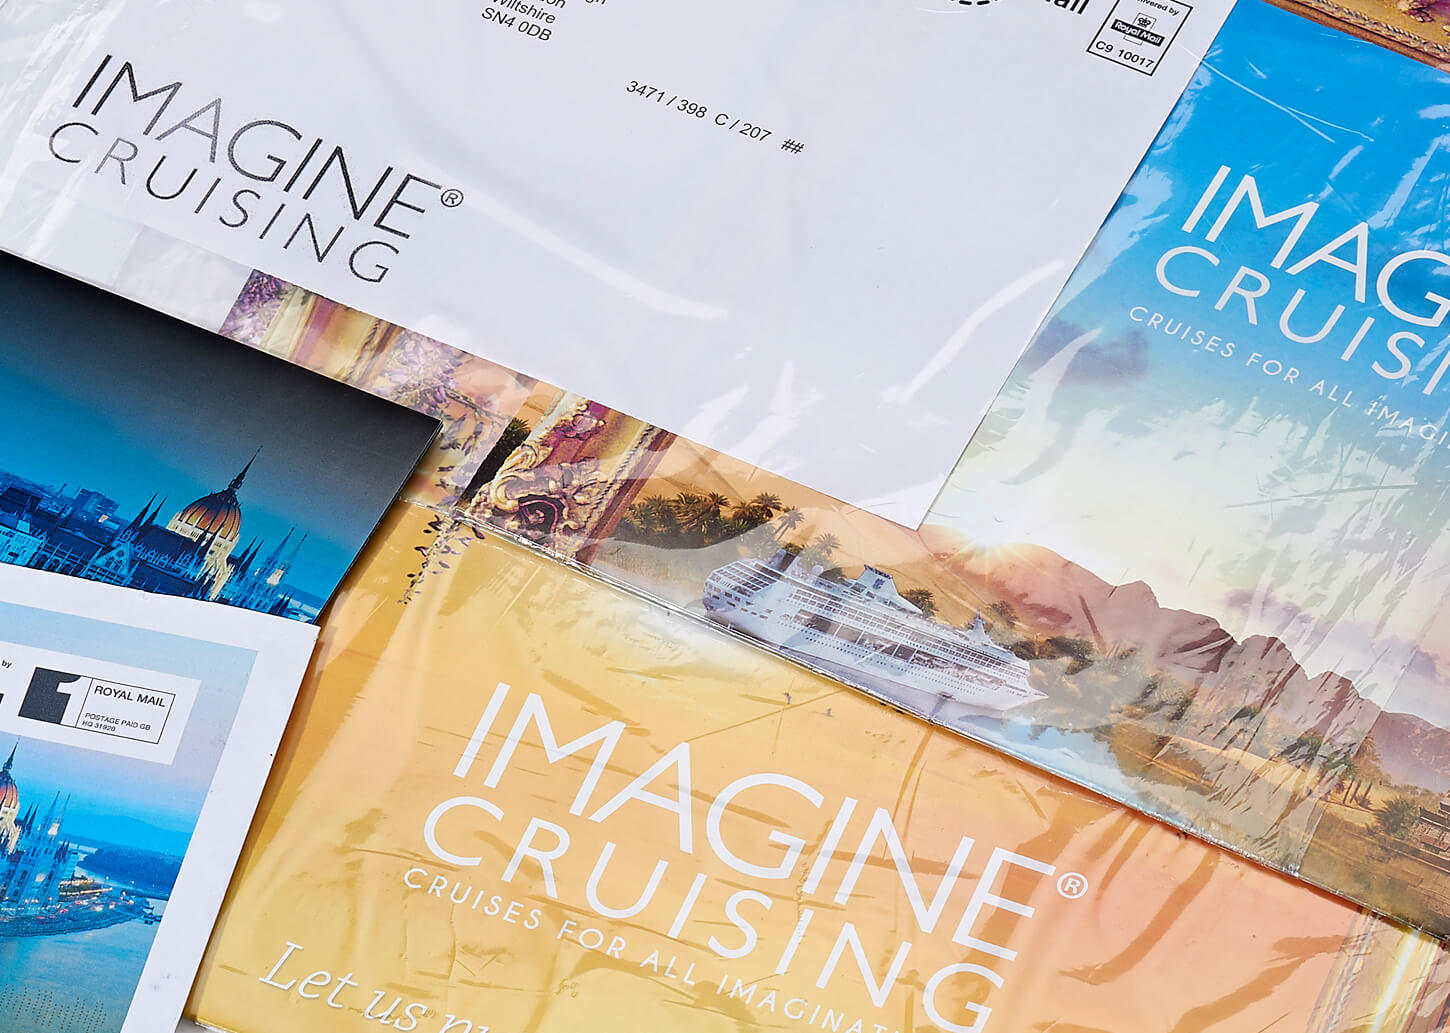 Direct mail printing projects produce outstanding results